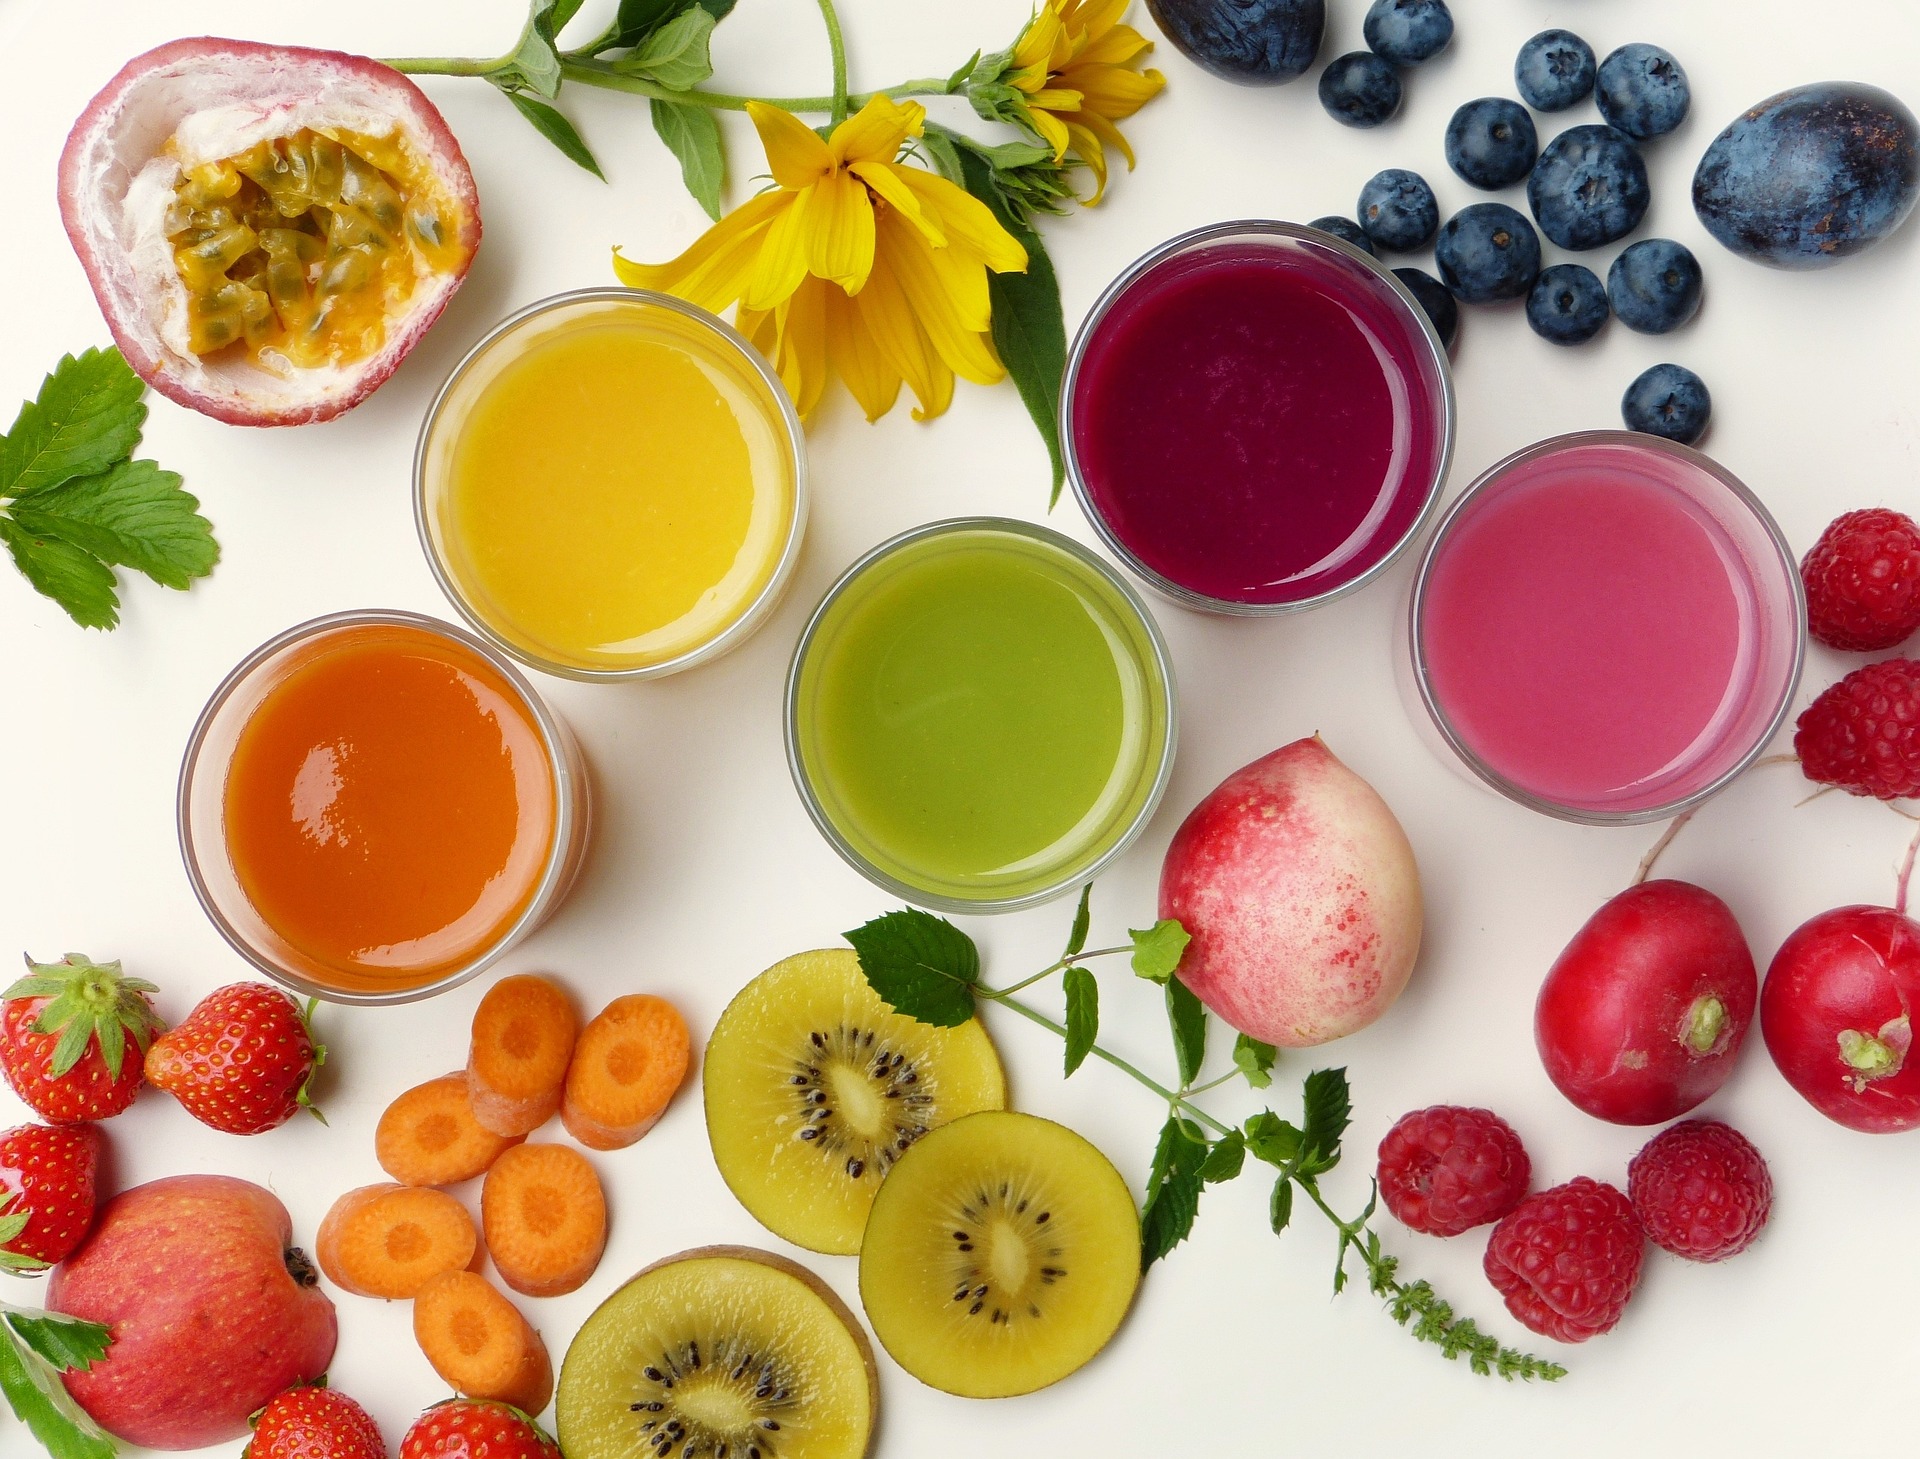 7 Things to Know Before Starting a Detox Program